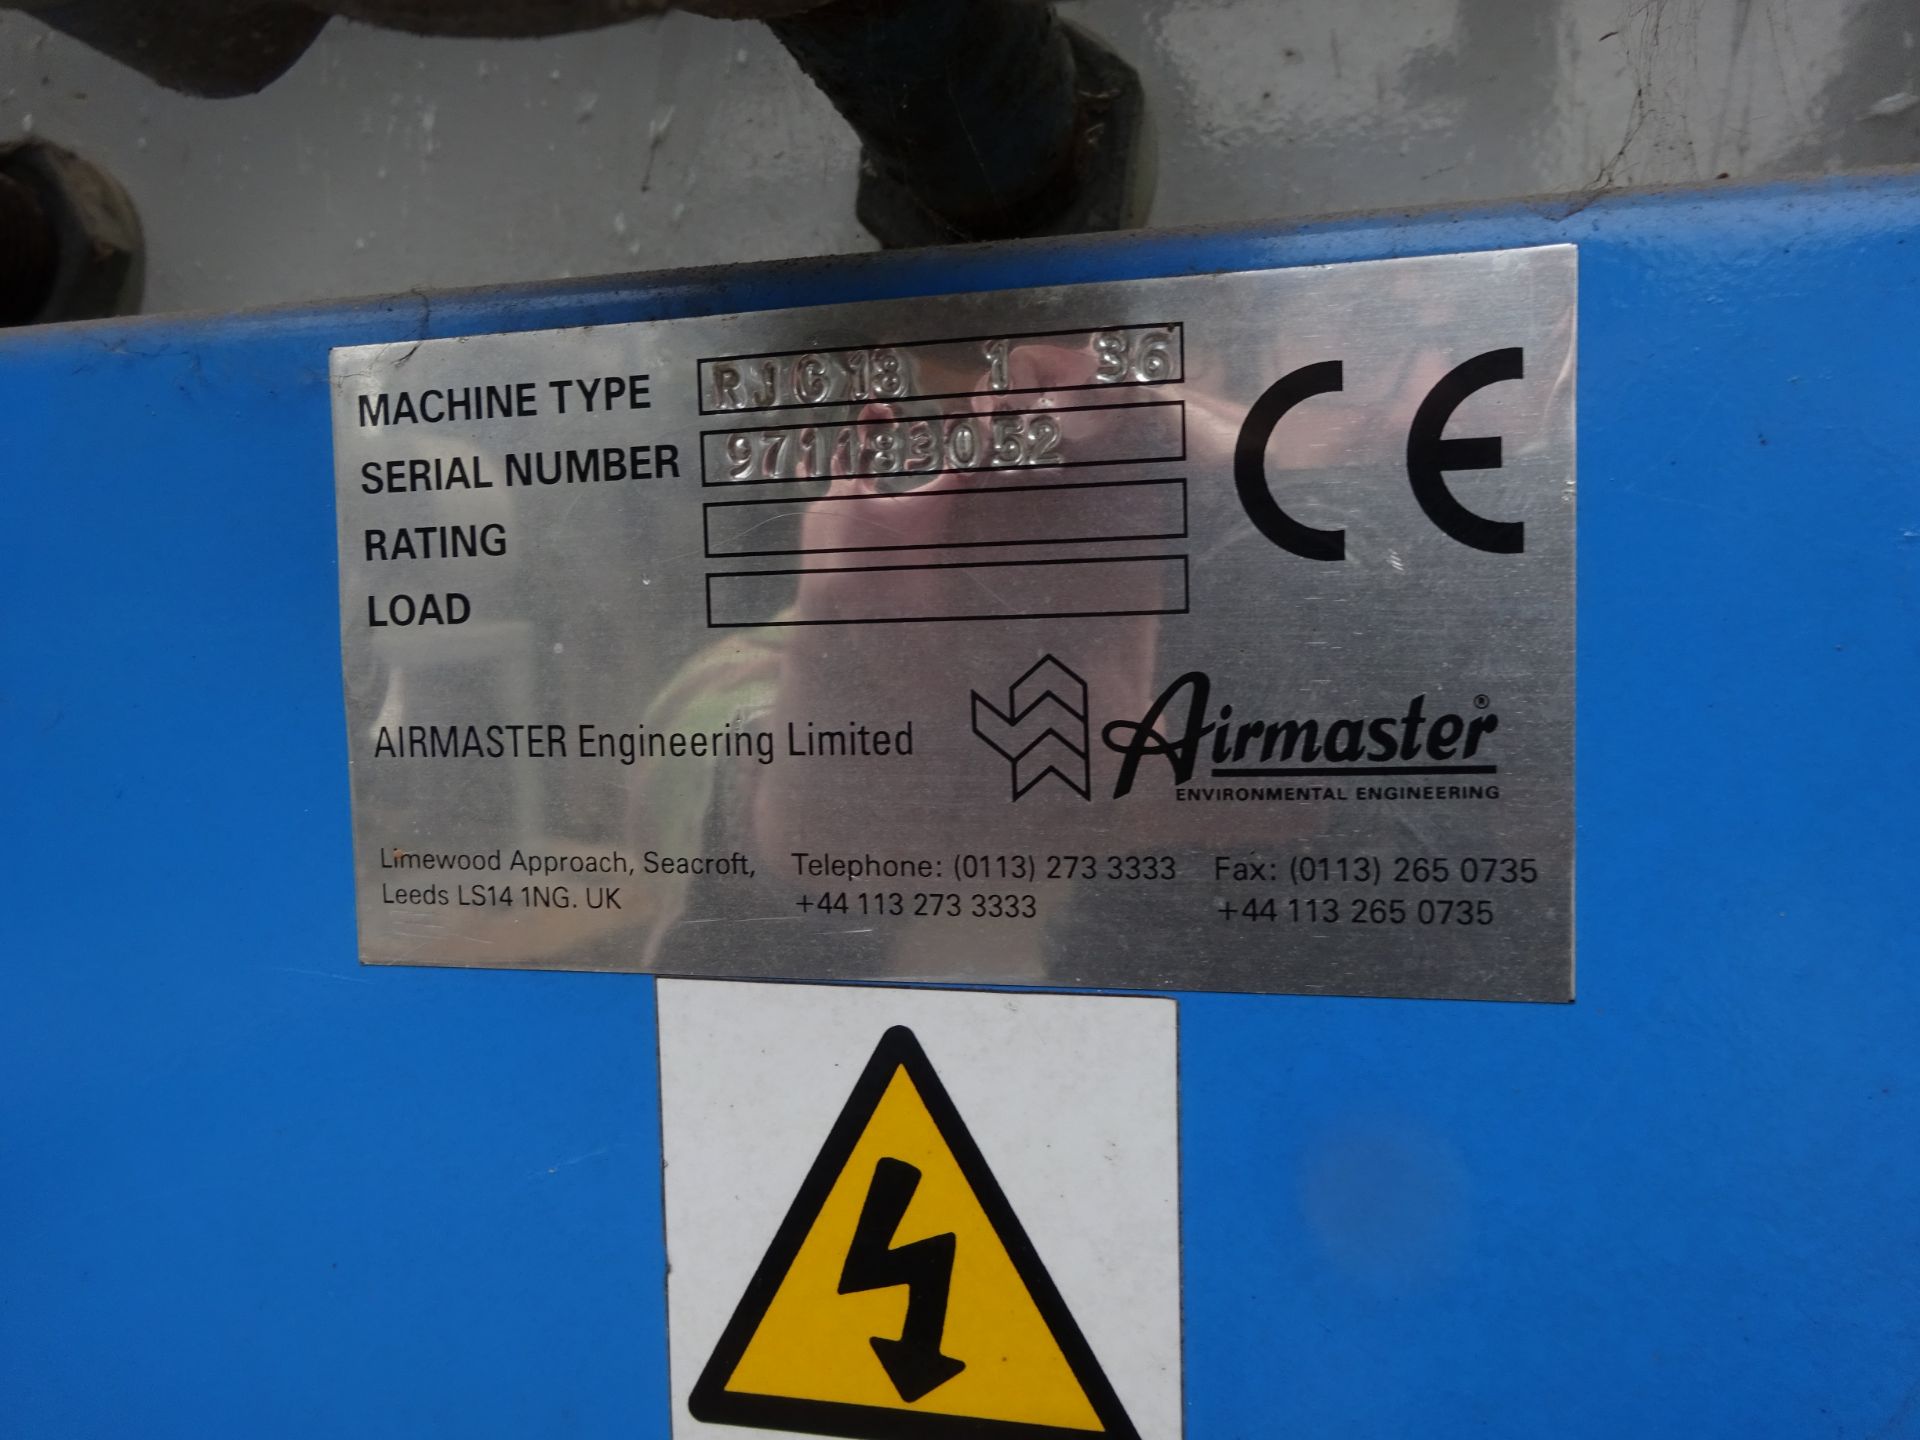 Airmaster RJC 18 1 36 Filter Unit, serial no. 971183052, plant no. 34, free loading onto purchaser’s - Image 3 of 4